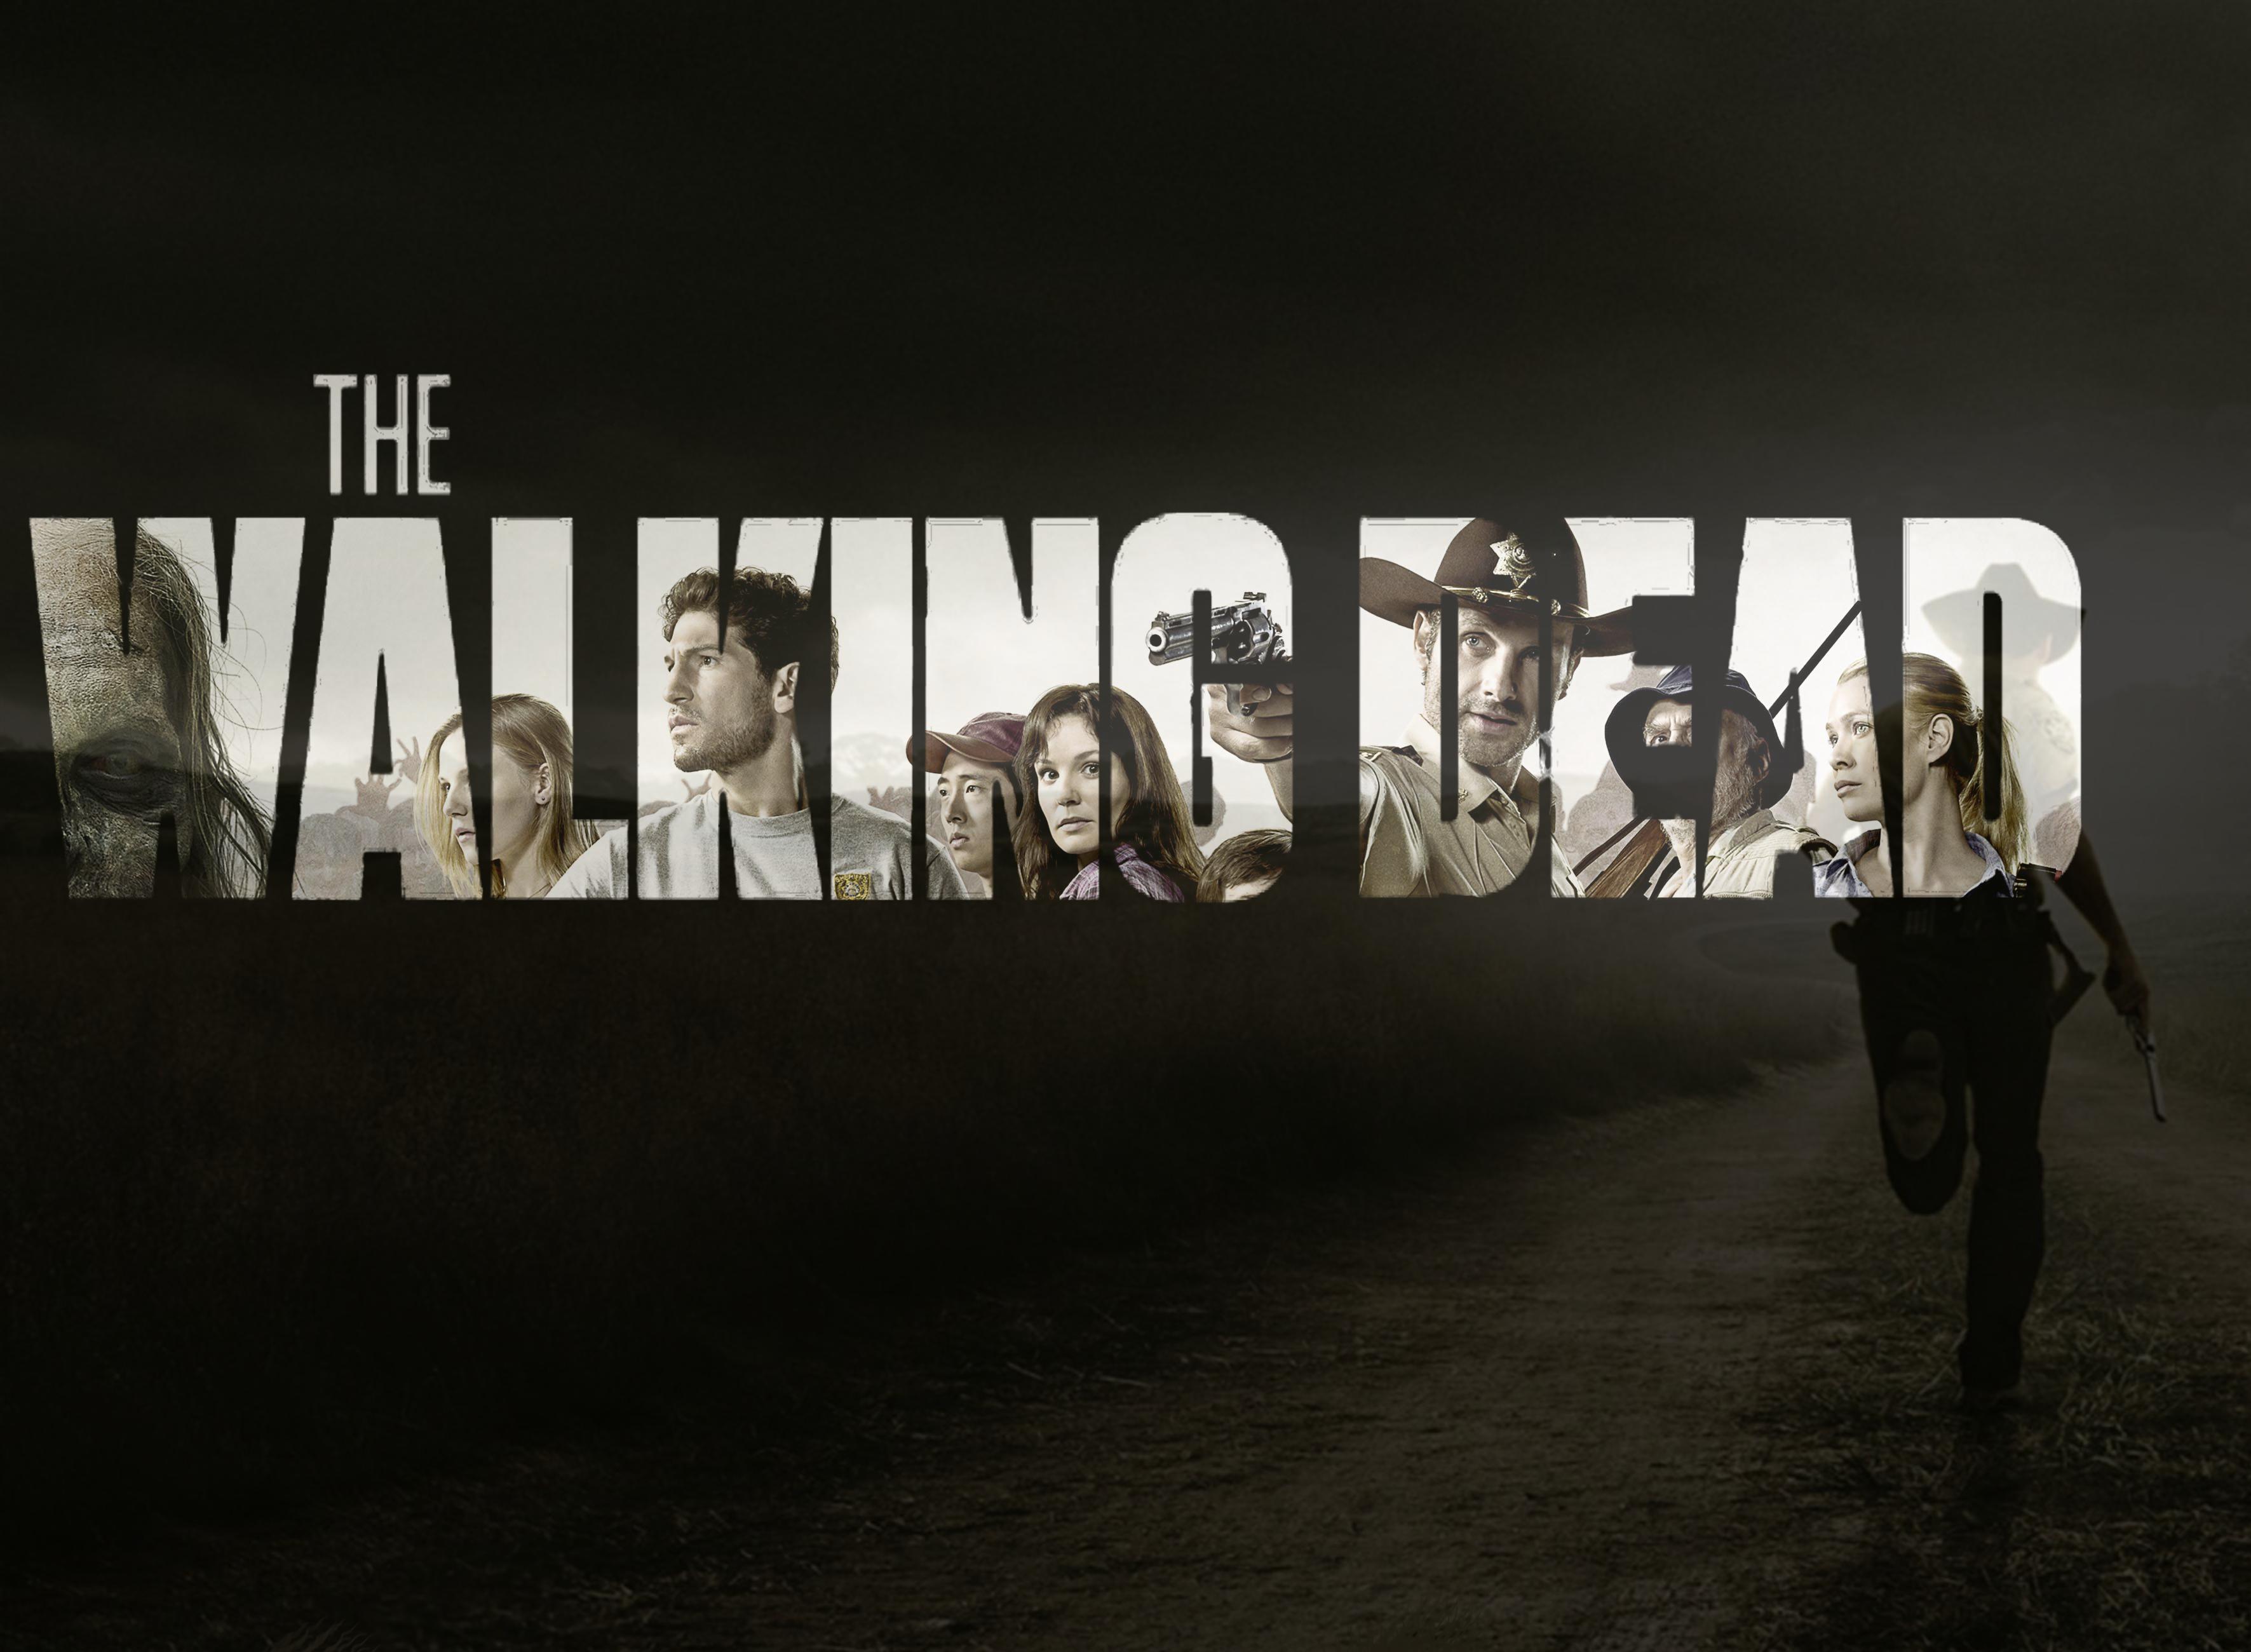 My friend requested a walking dead wallpaper... so I delivered ...